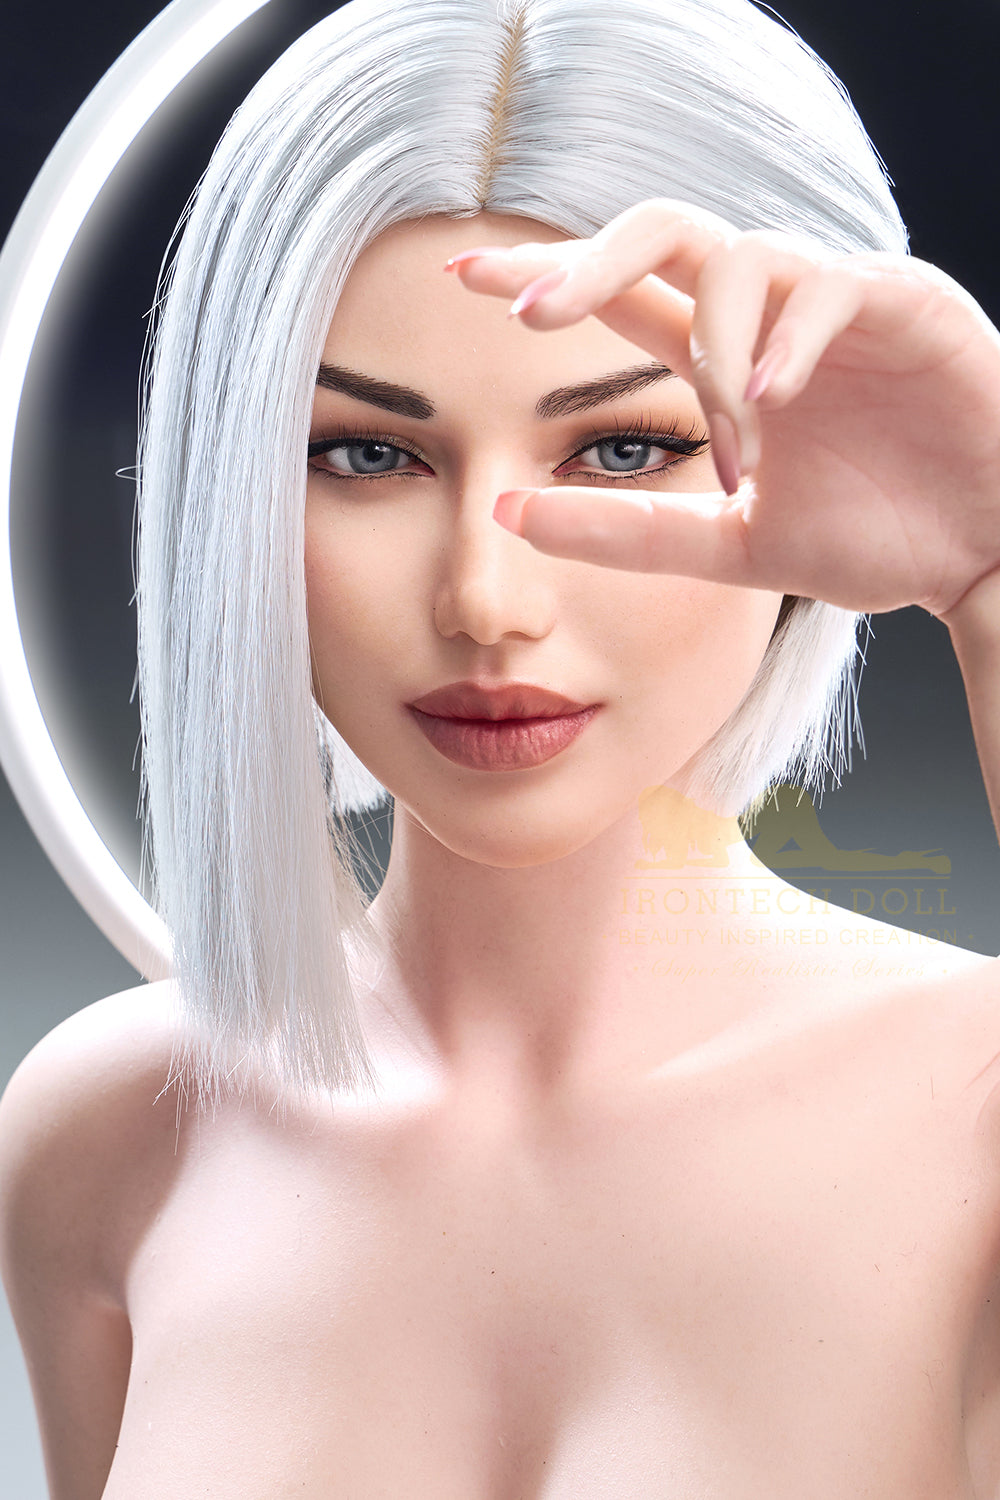 Irontechdoll Elly 159cm S13 Full Silicone Adult Love Doll Natural Skin Grey Hair Sex Doll